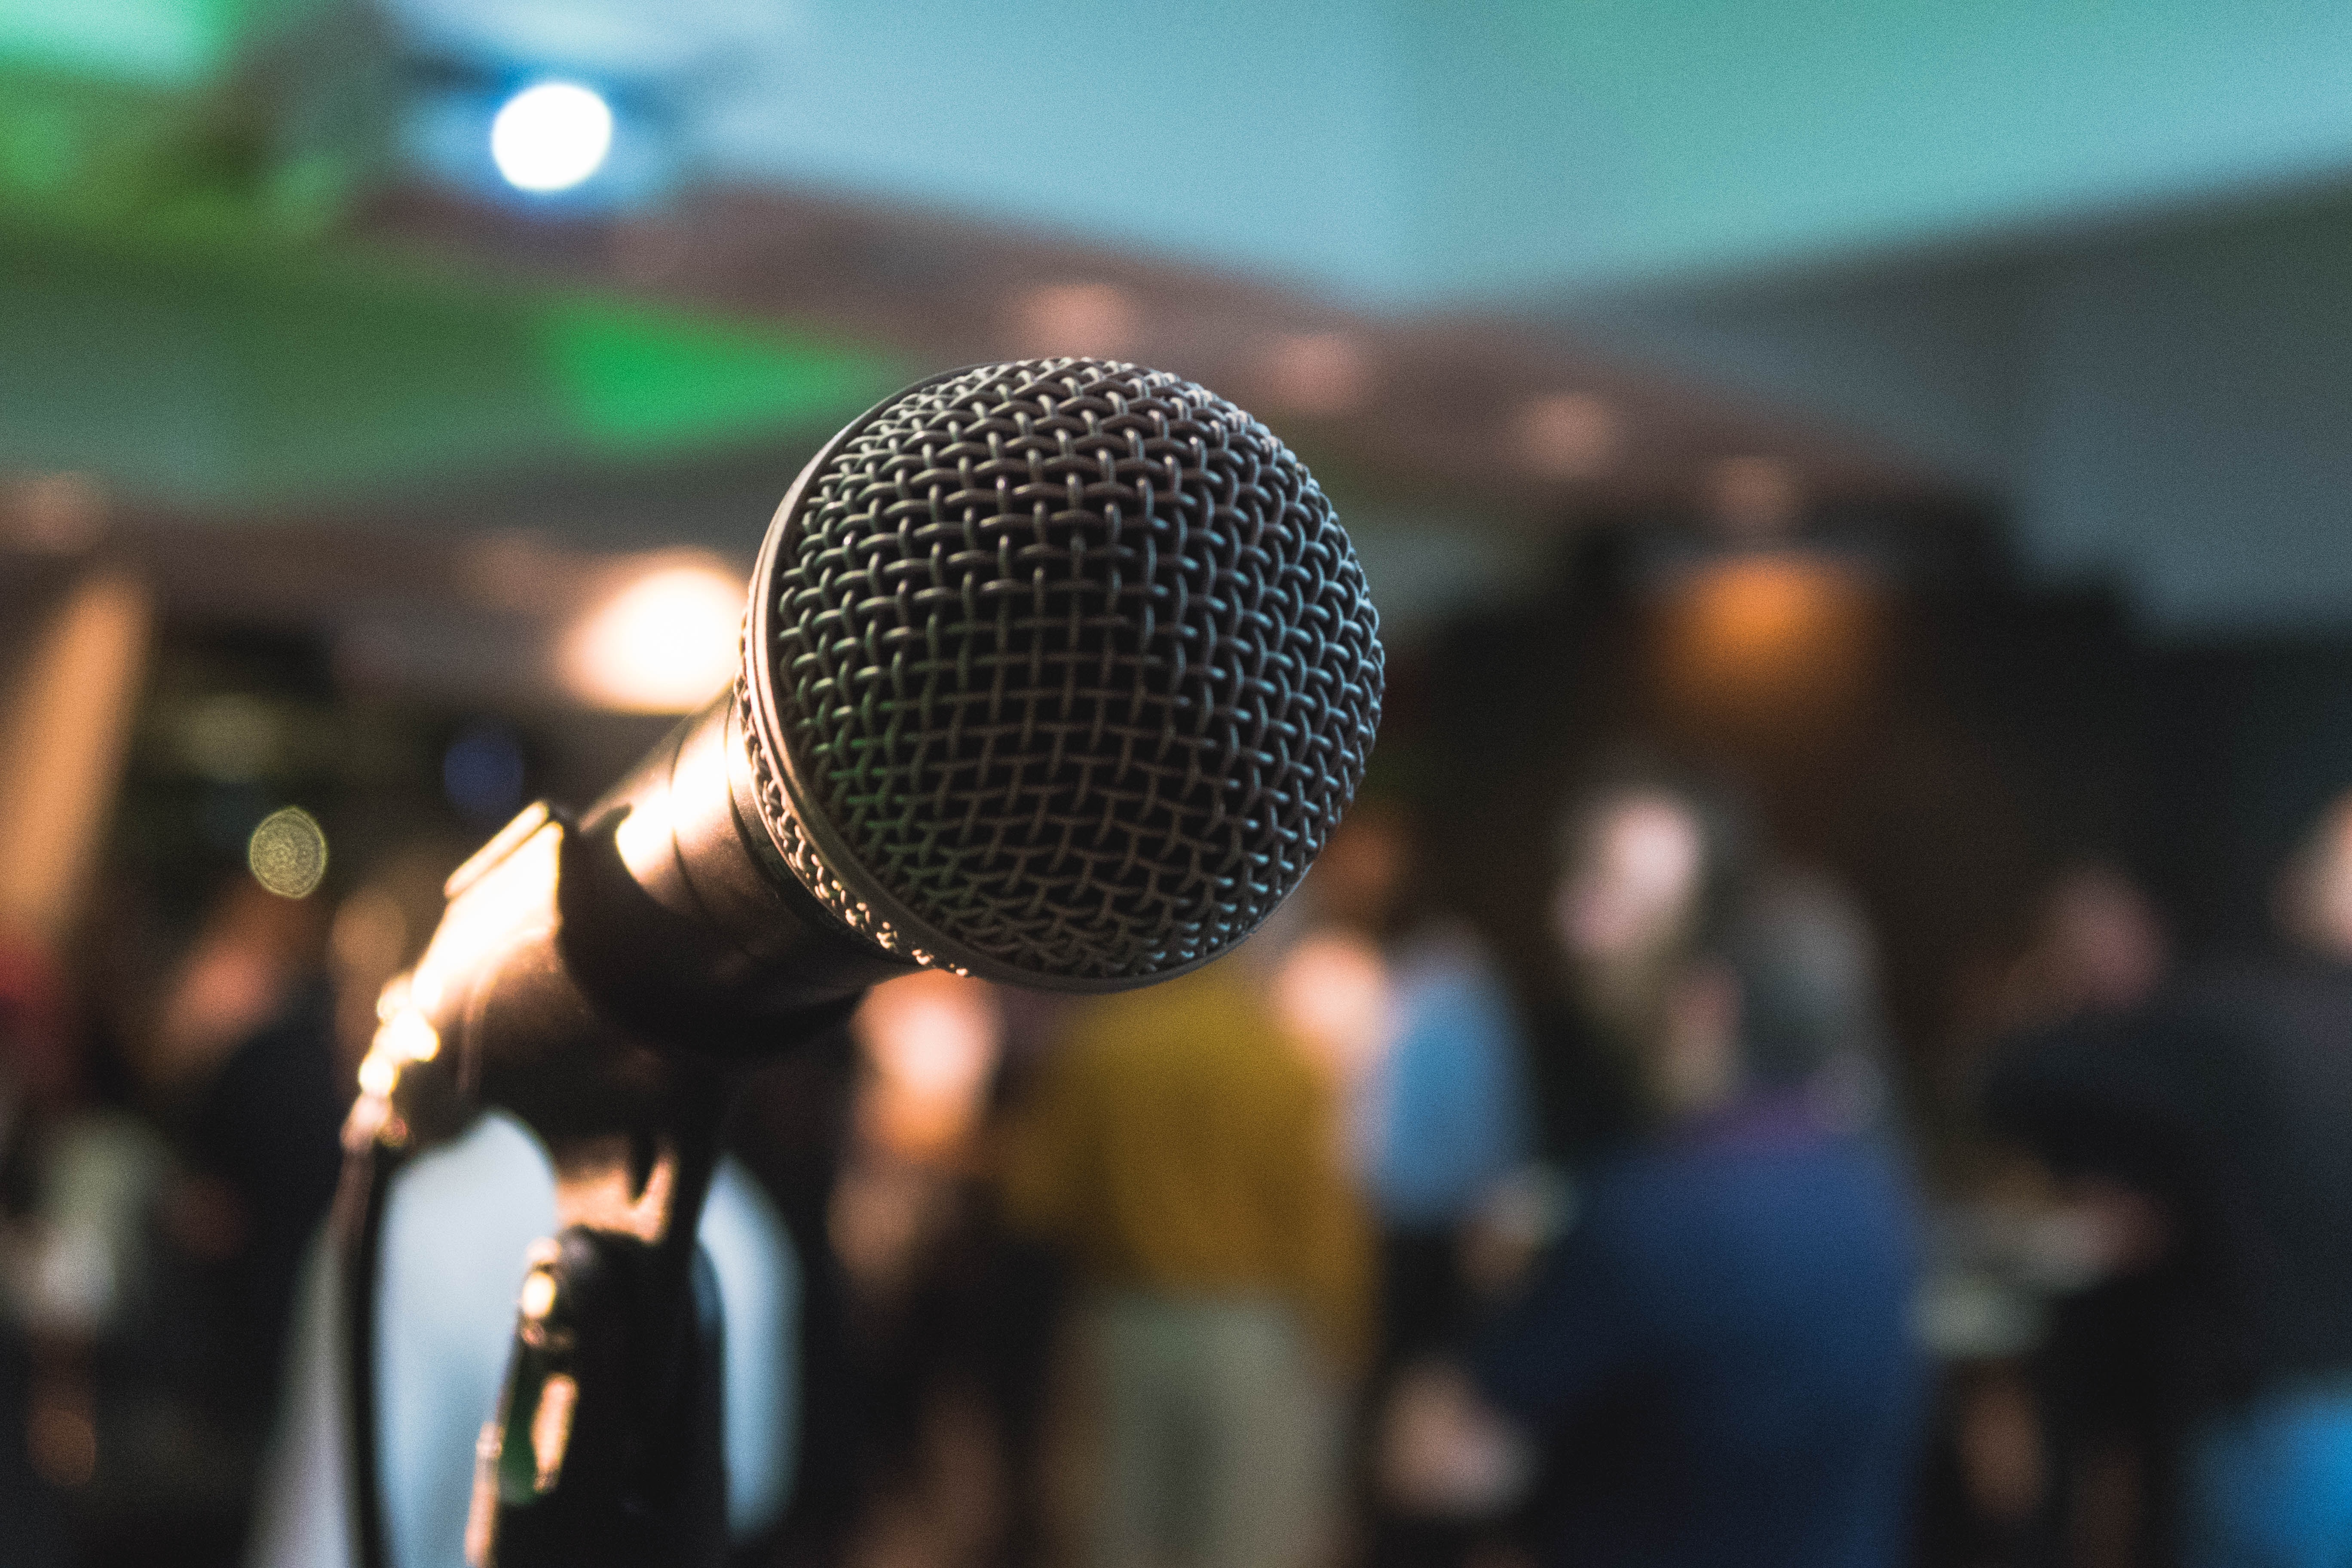 How to start speaking at conferences?